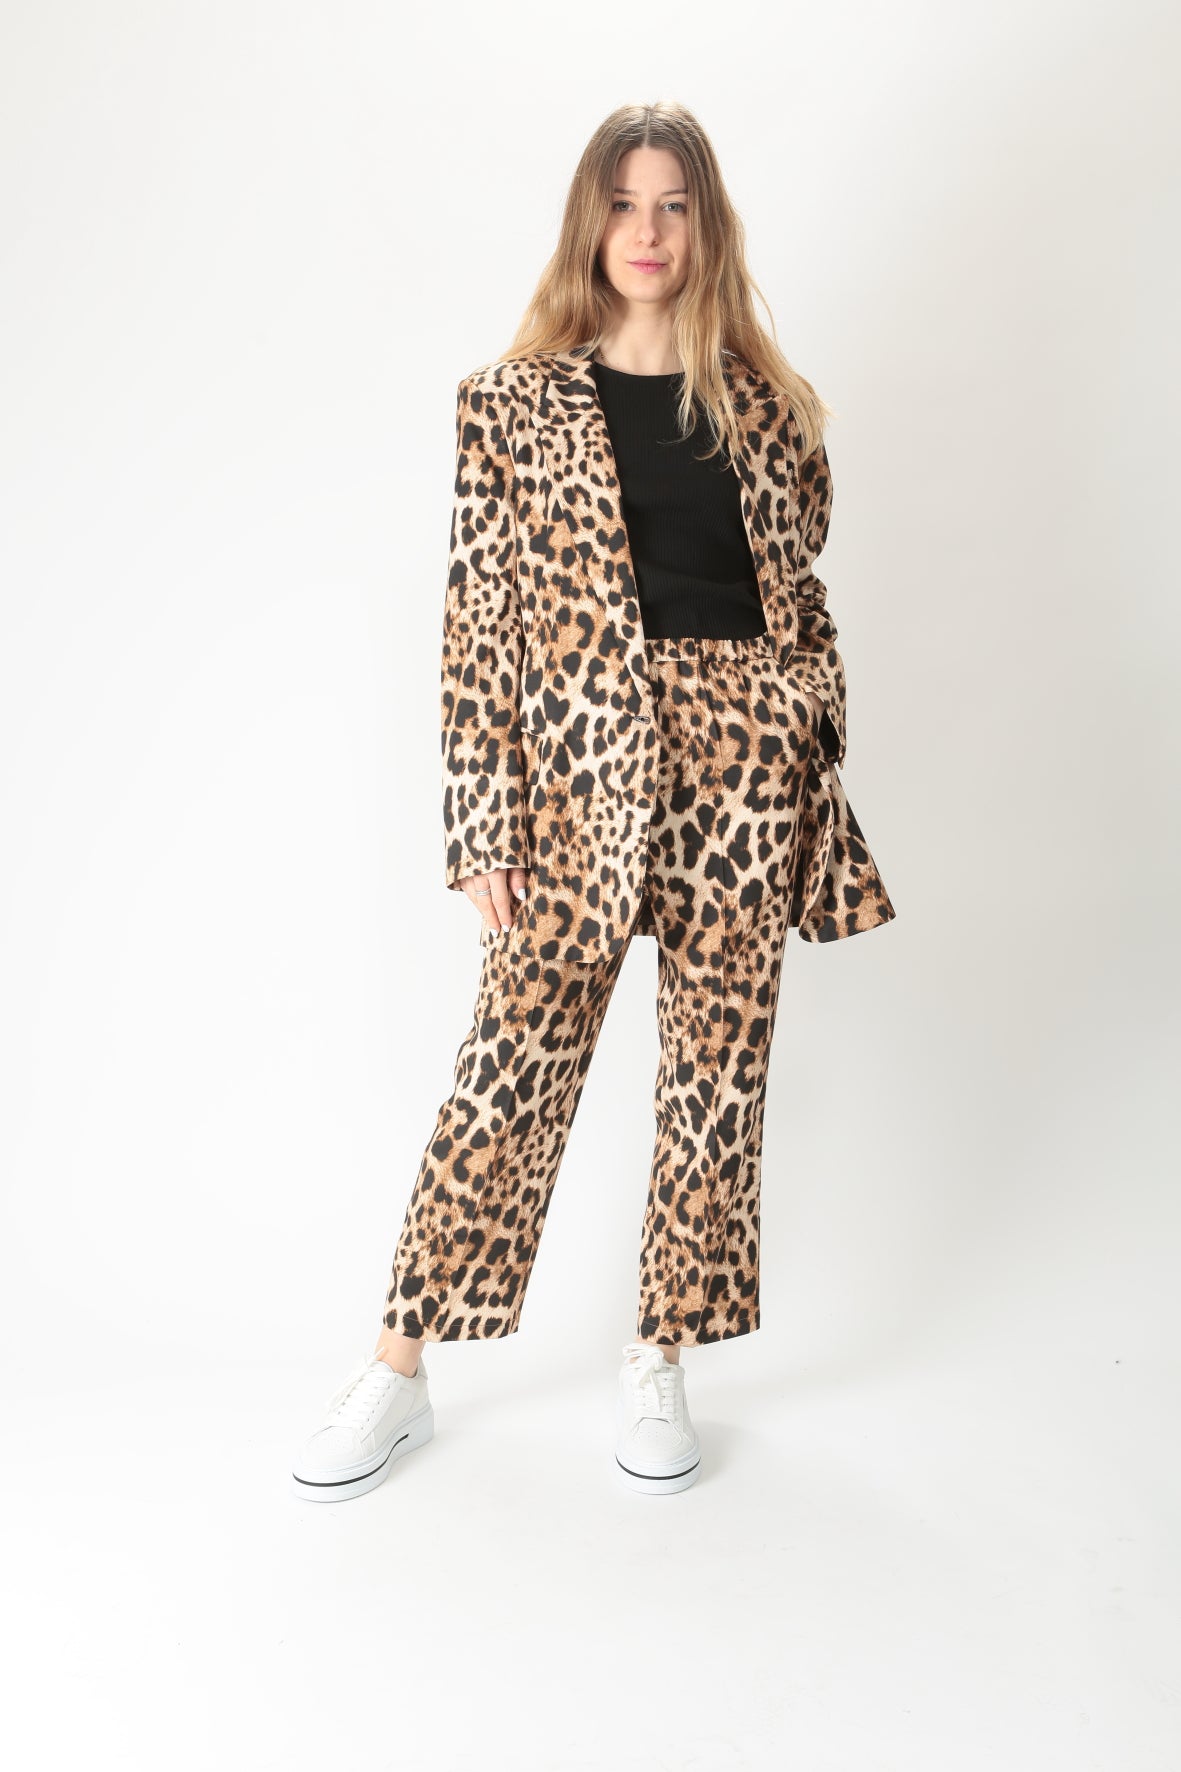 https://admin.shopify.com/store/gulieshop/products/9002495770973#:~:text=Invia-,The%20M%20Giacca%20oversize%20animalier%20Mirta,-Contenuto%20multimediale%201